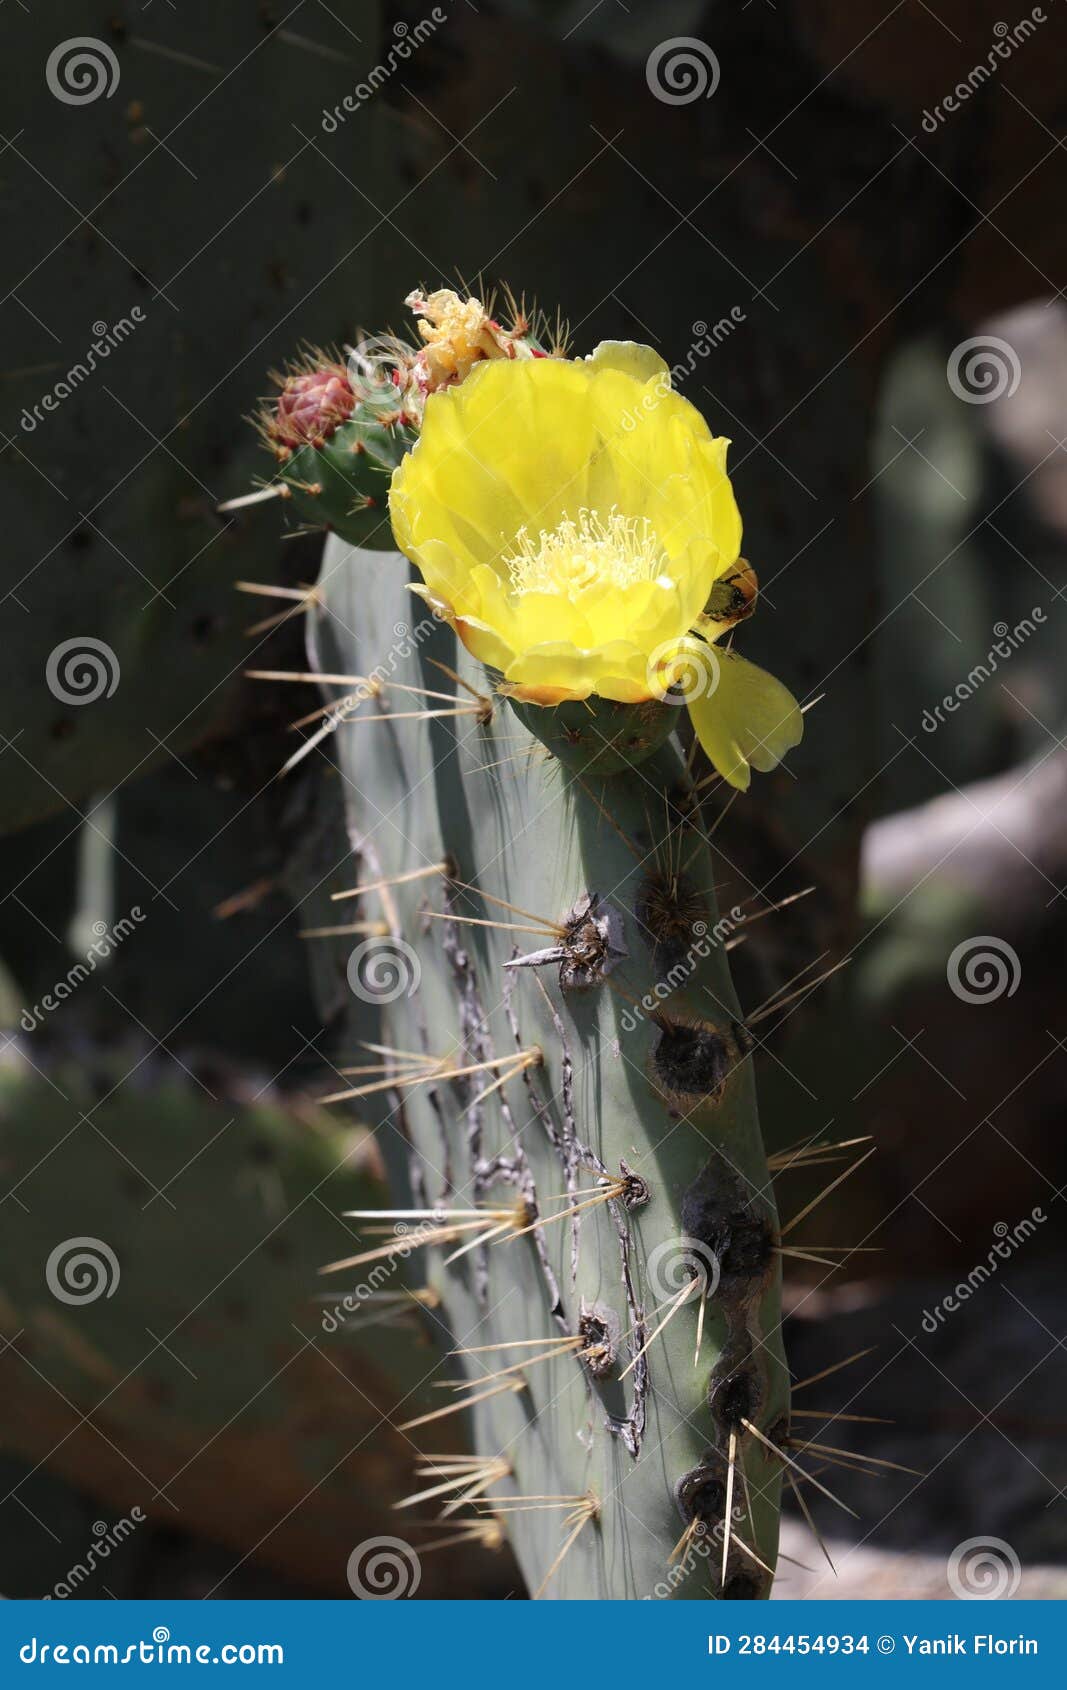 prickly pear cactus with a yellow flower